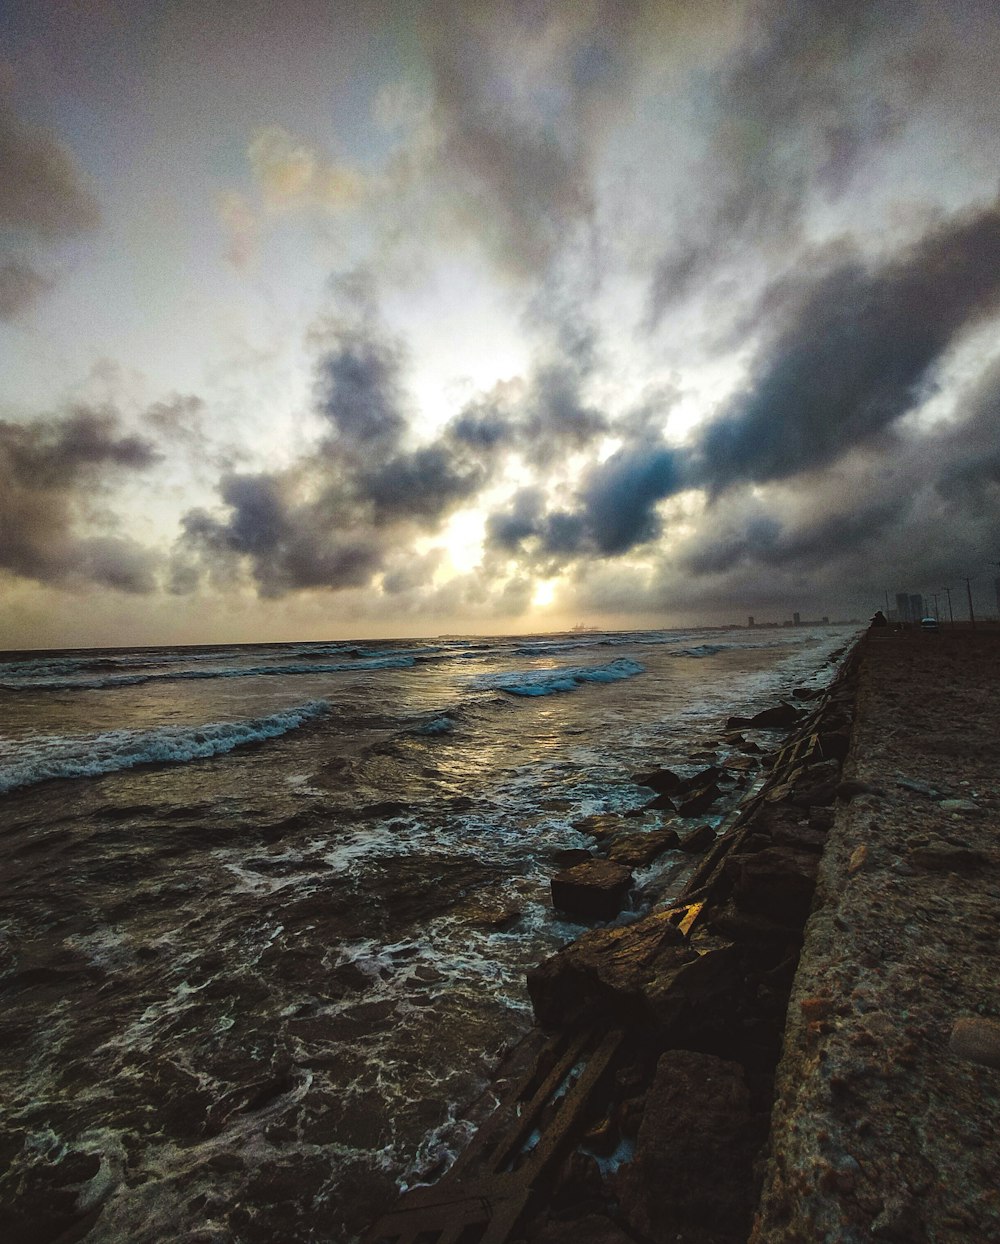 sea waves crashing on shore under cloudy sky during daytime